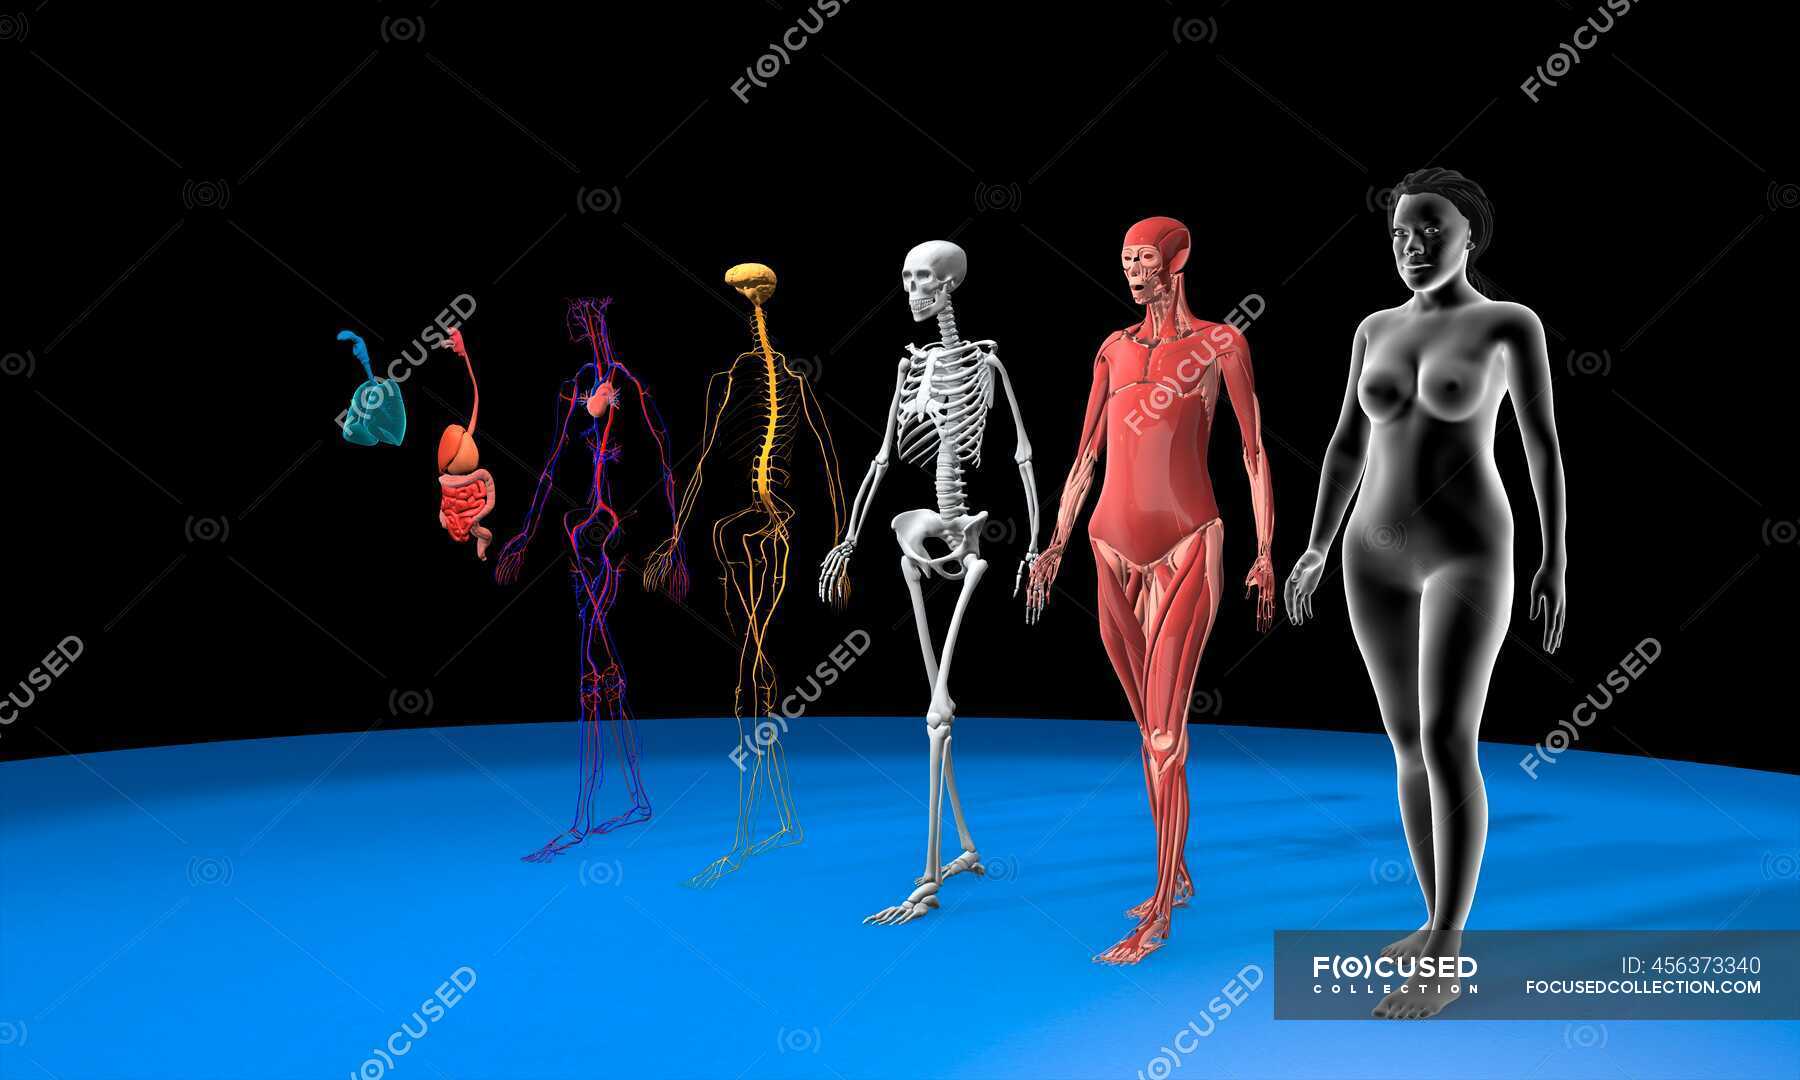 Human body systems, 3d illustration. Anatomy of a female body showing from  right to left the muscular, skeletal, nervous, cardiovascular, digestive  and respiratory system. — organs, bones - Stock Photo | #456373340